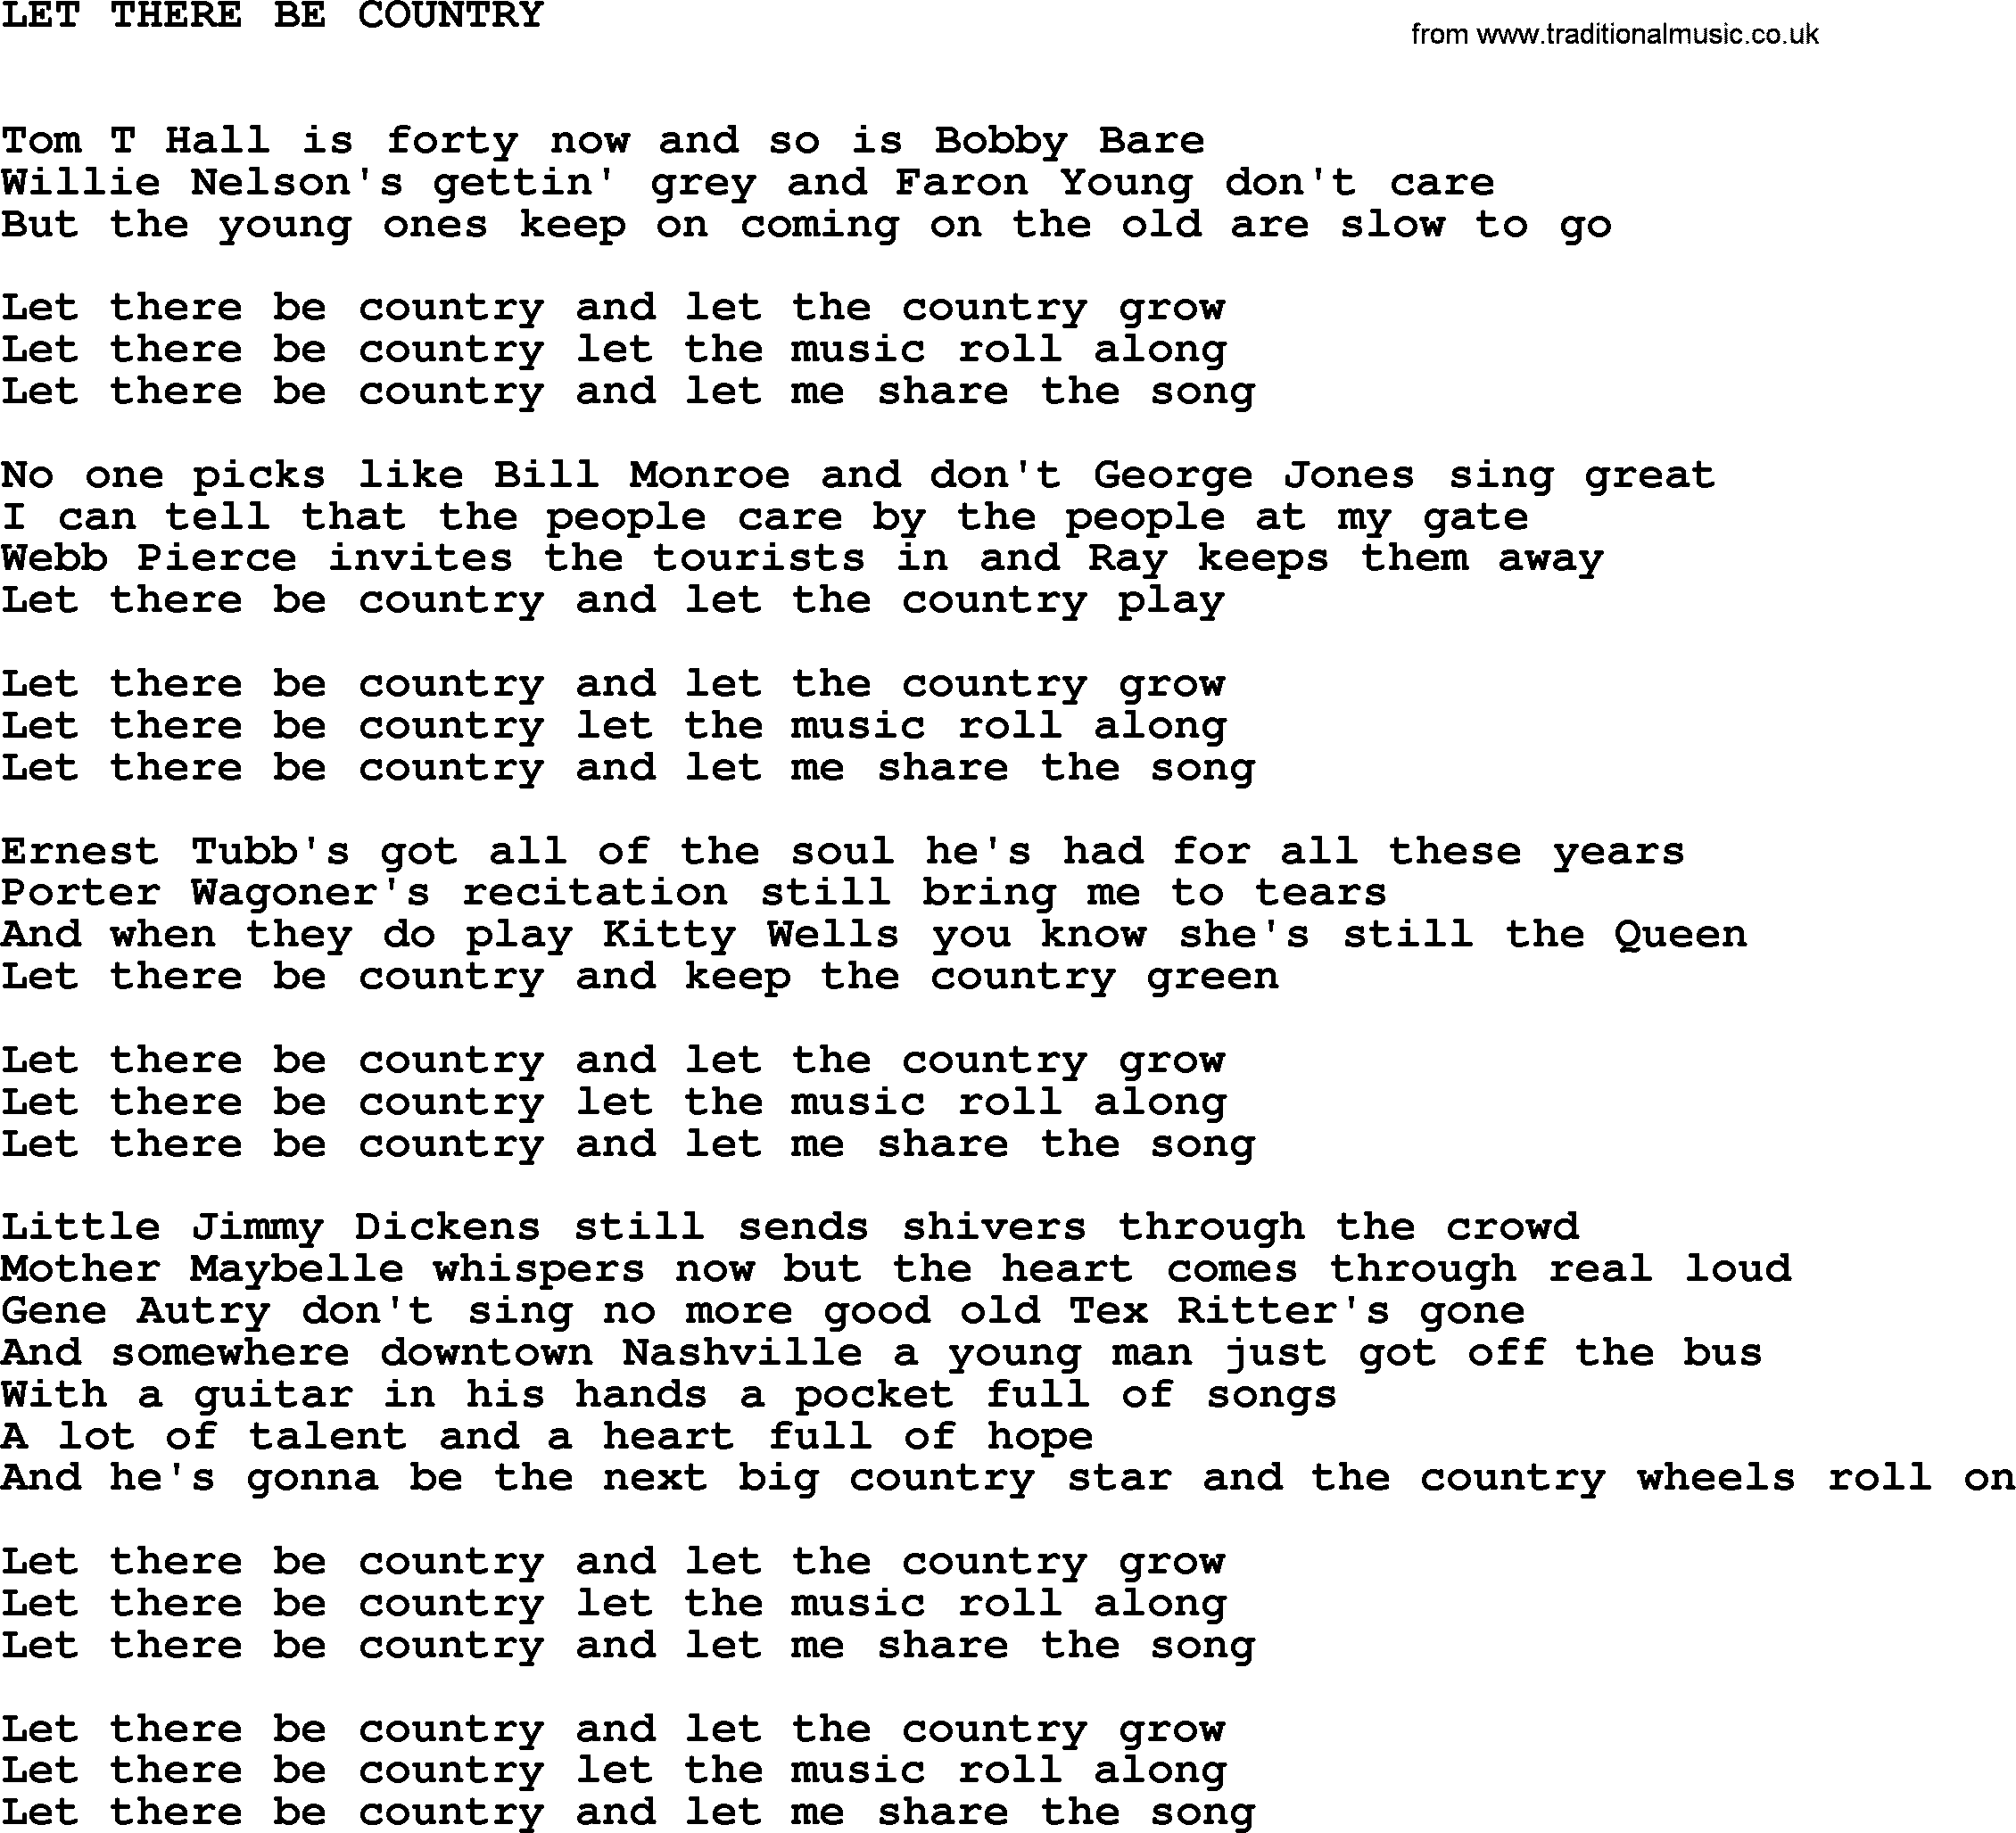 Johnny Cash song Let There Be Country.txt lyrics